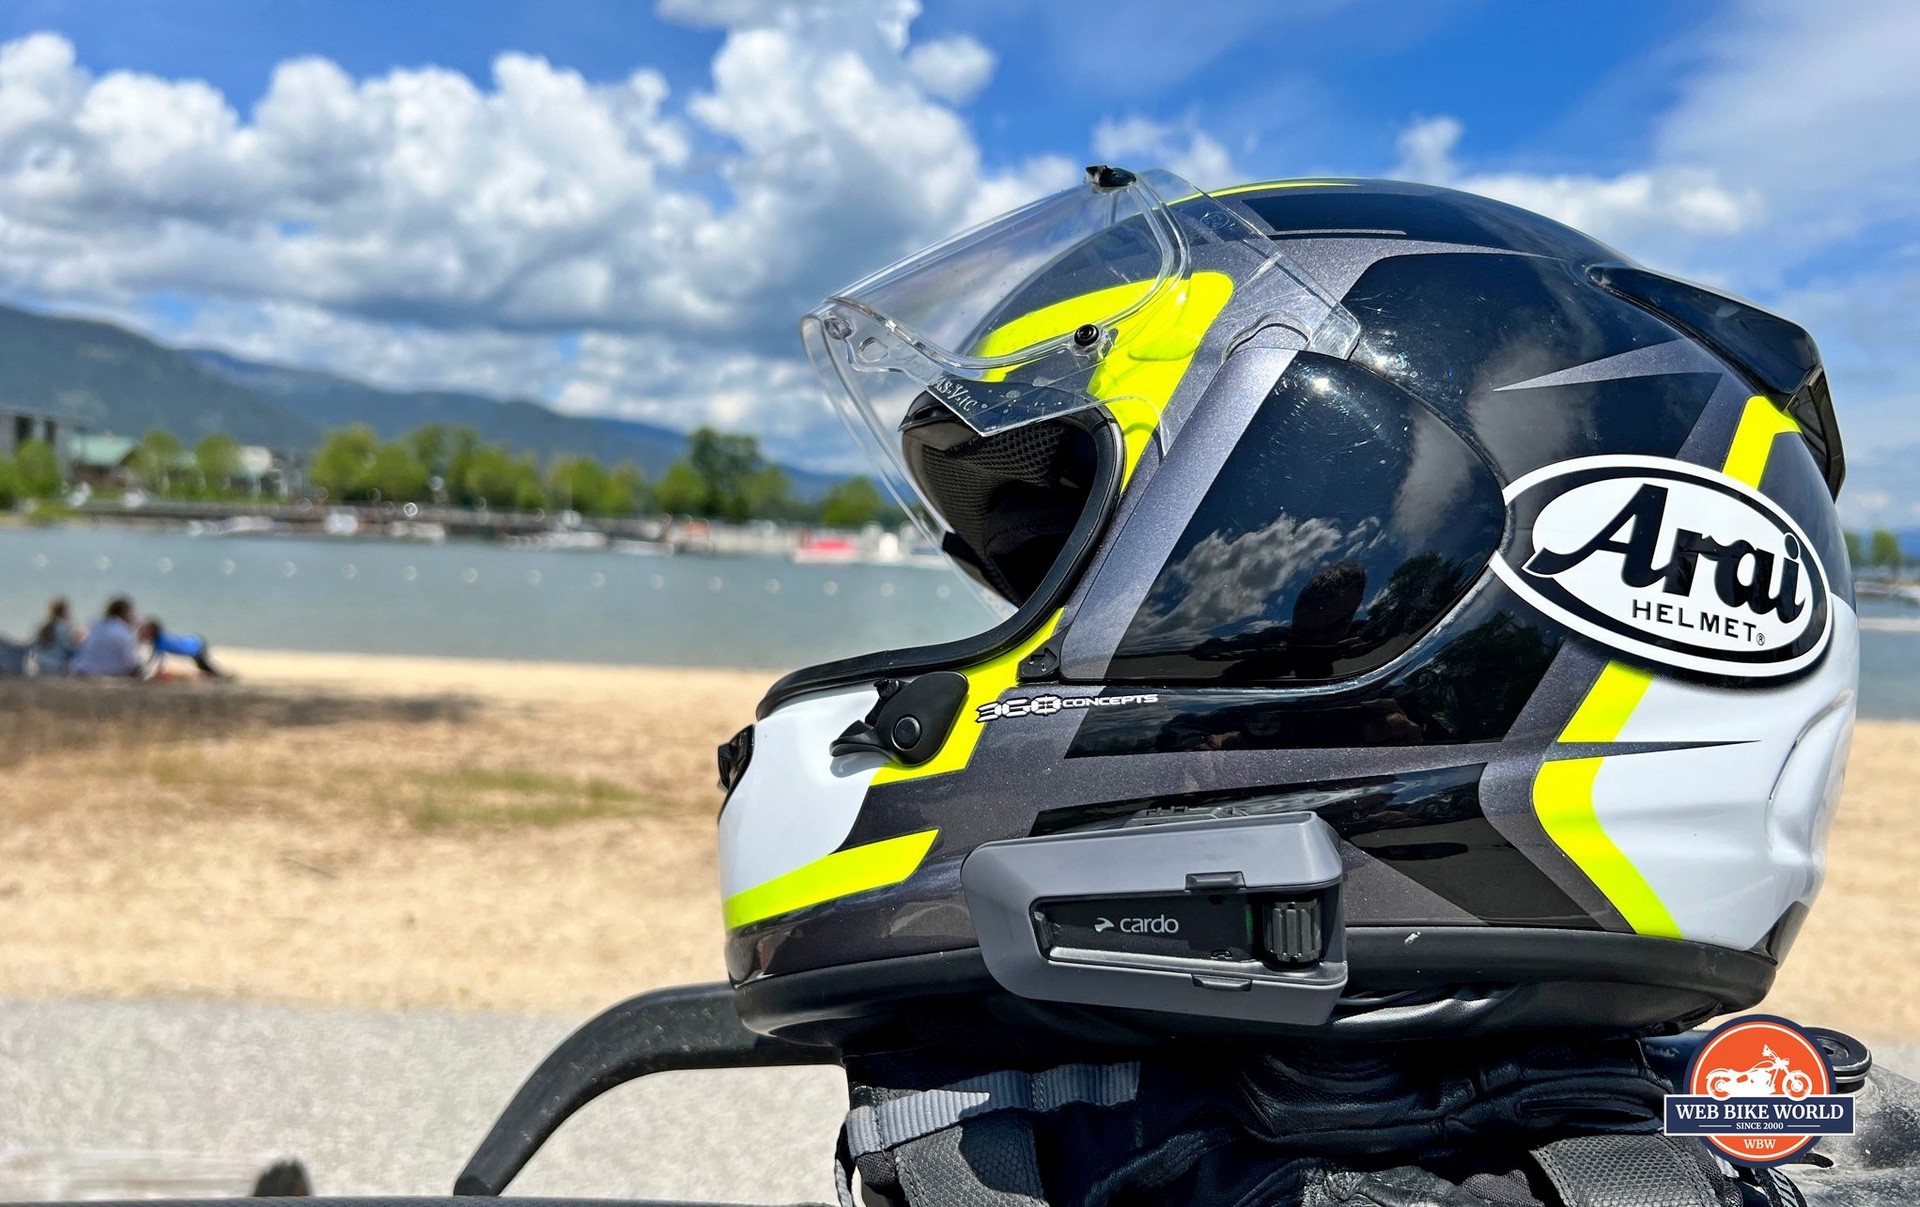 Review: Cardo's New Freecom 4X Helmet Comms System Keeps You Connected -  And Entertained